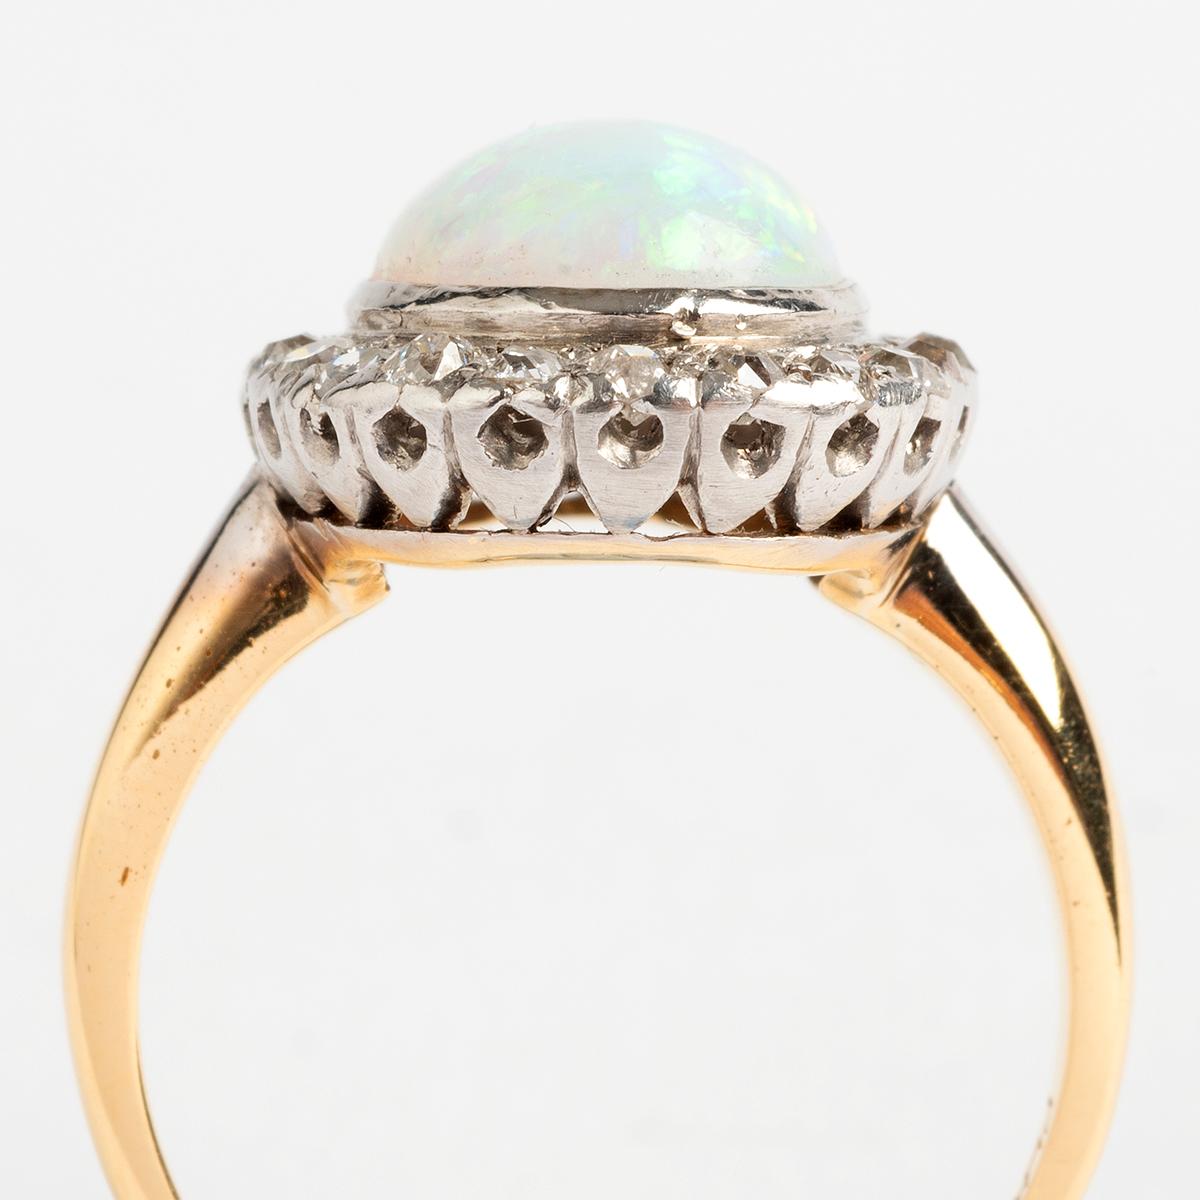 Mixed Cut Antique Cabochon Opal Old Cut Diamond Cluster Ring, Set in 18K Gold